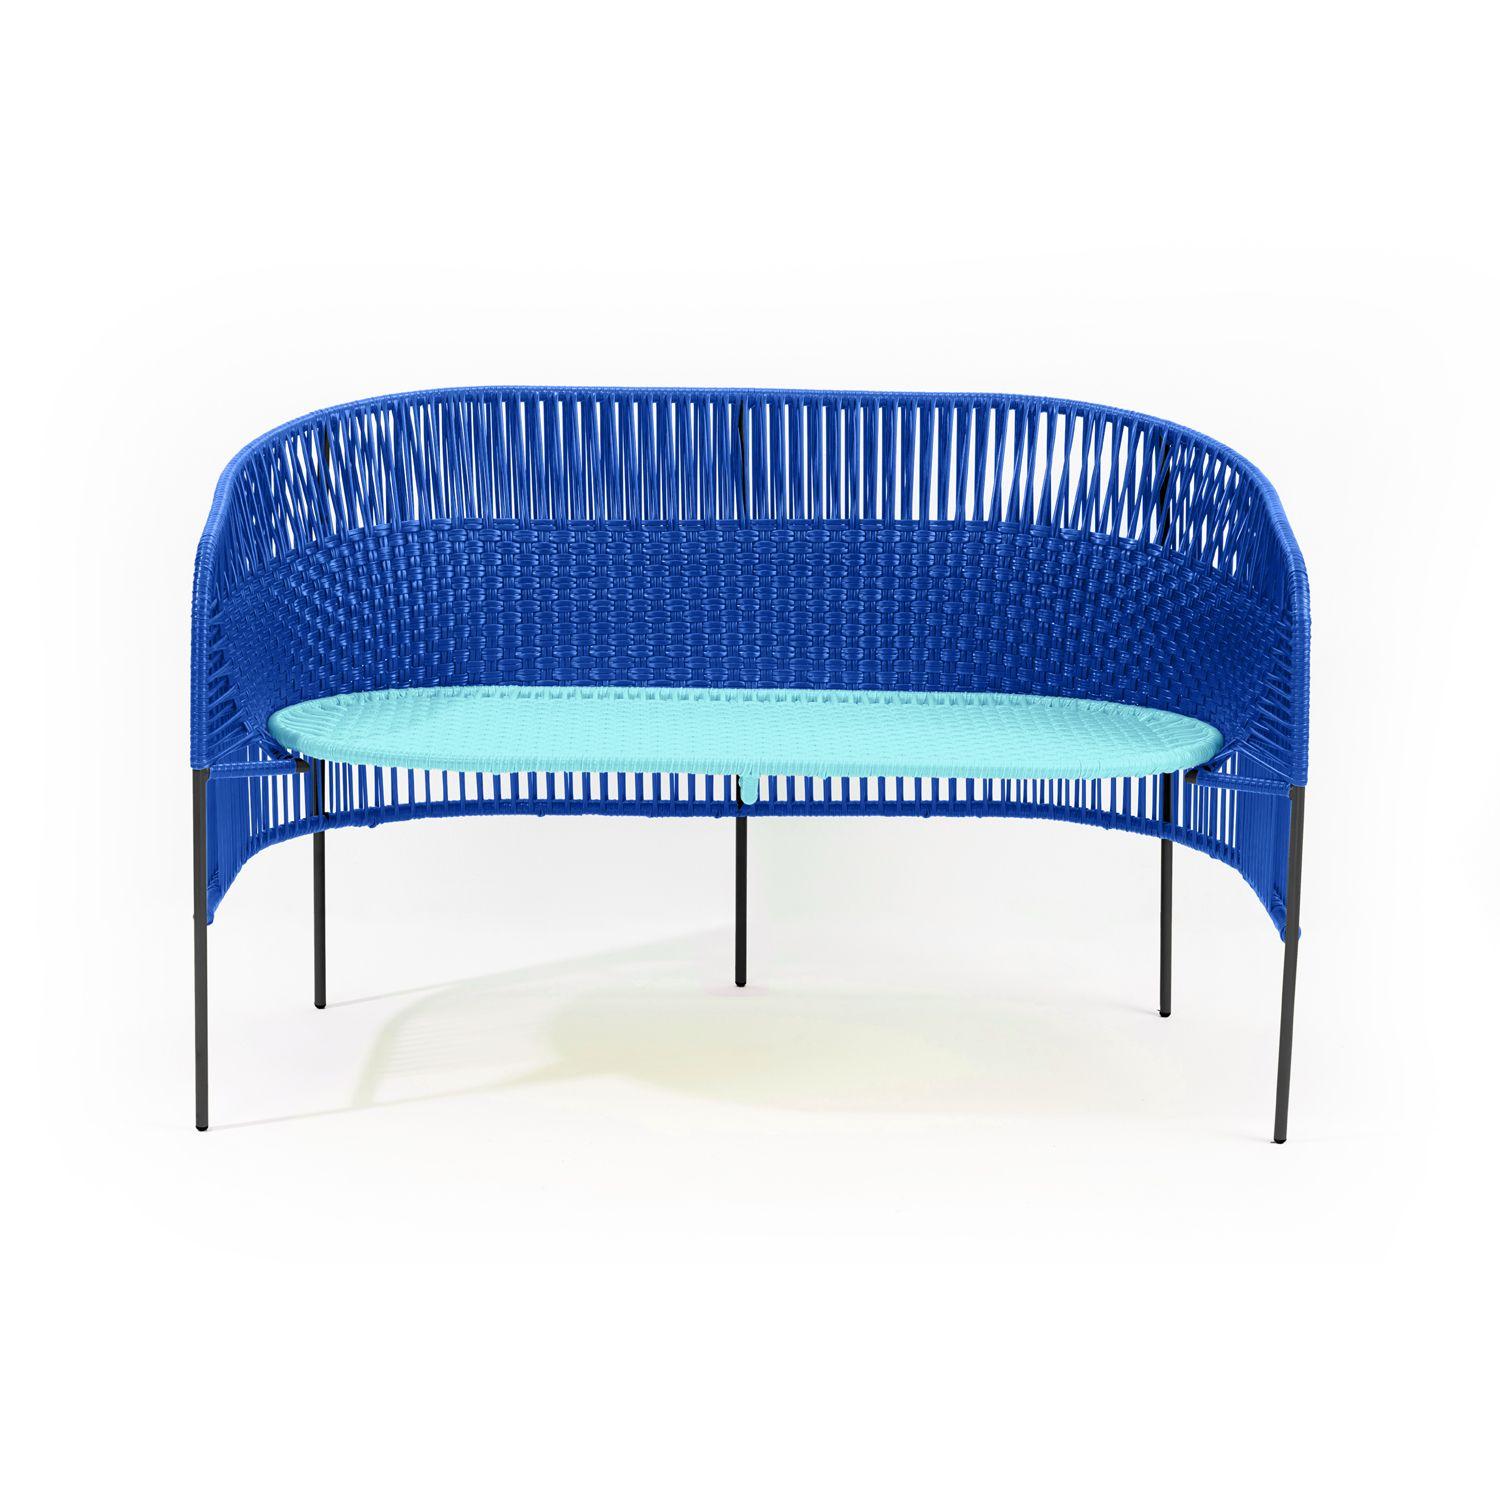 The elegant Caribe 2 Seater Bench is a colourful design for seating arrangements inside and outdoors. It’s part of the Caribe collection, designed by Sebastian Herkner for ames. The German designer visited Colombia together with ames founder Ana